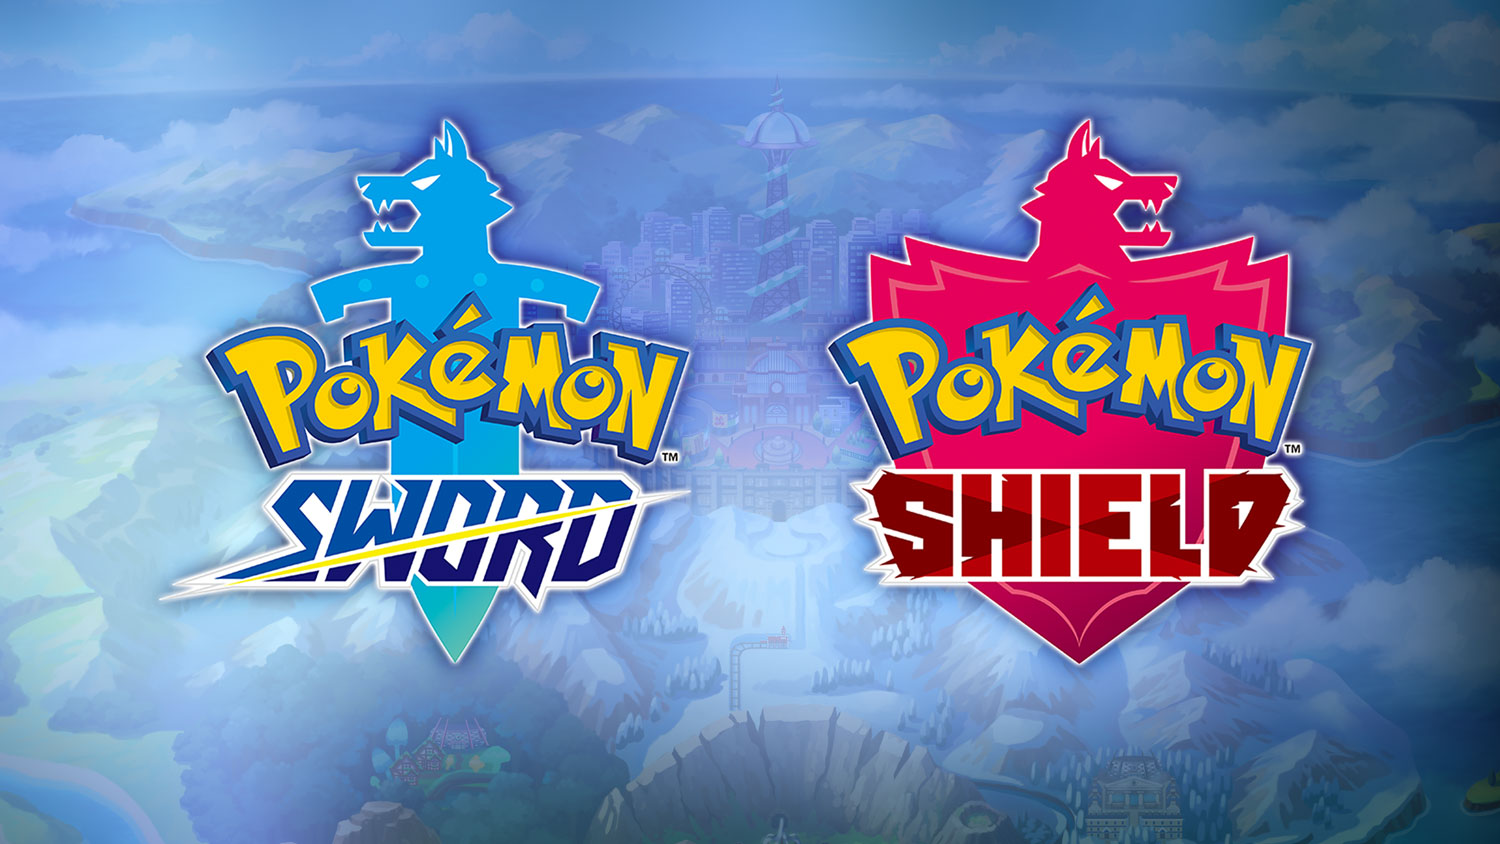 Pokemon Sword And Shield Walkthrough And Guide